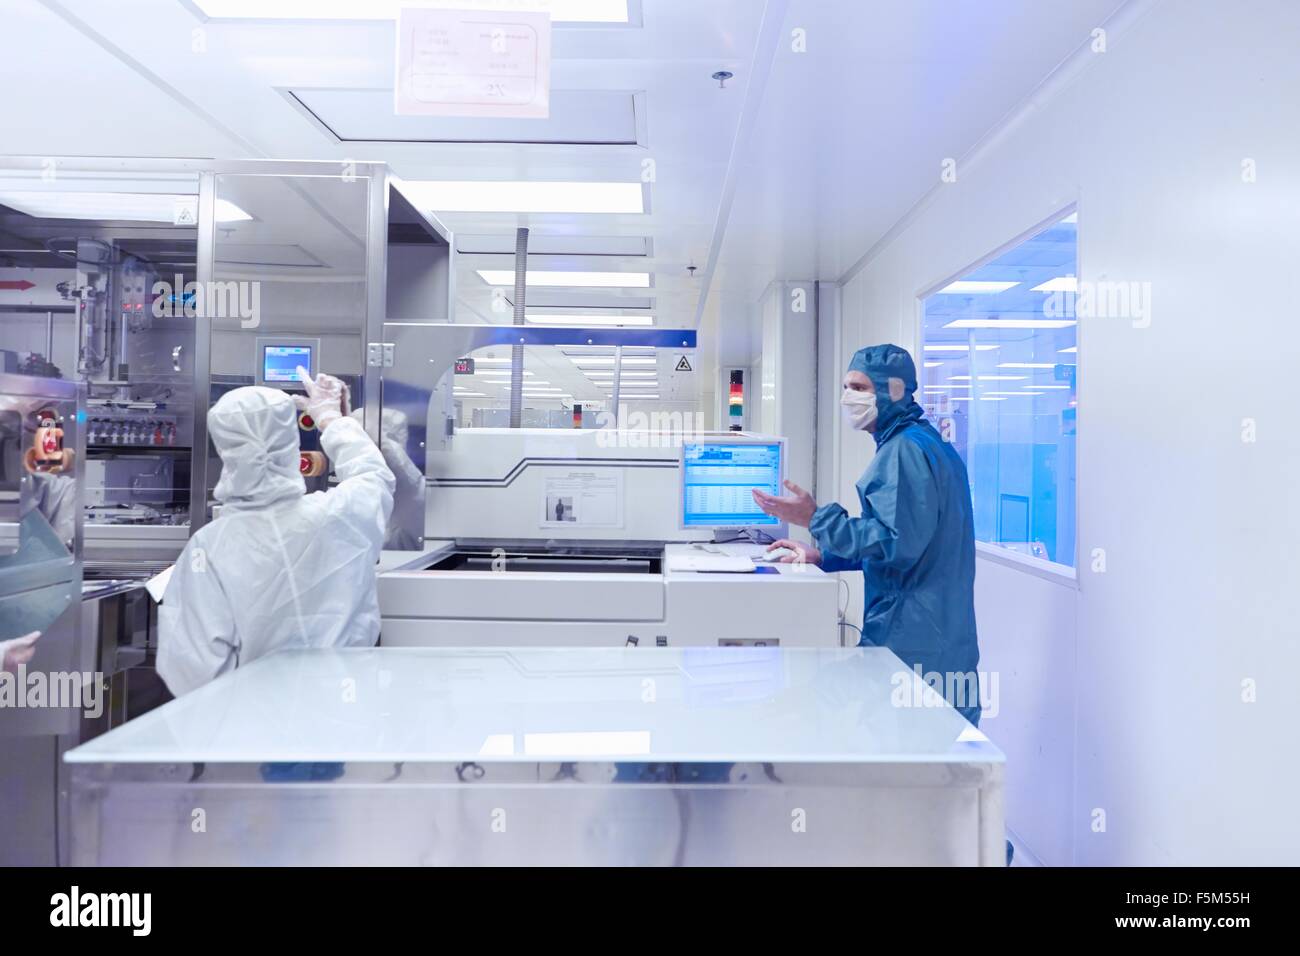 Workers using manufacturing machinery in flexible electronics factory clean room Stock Photo